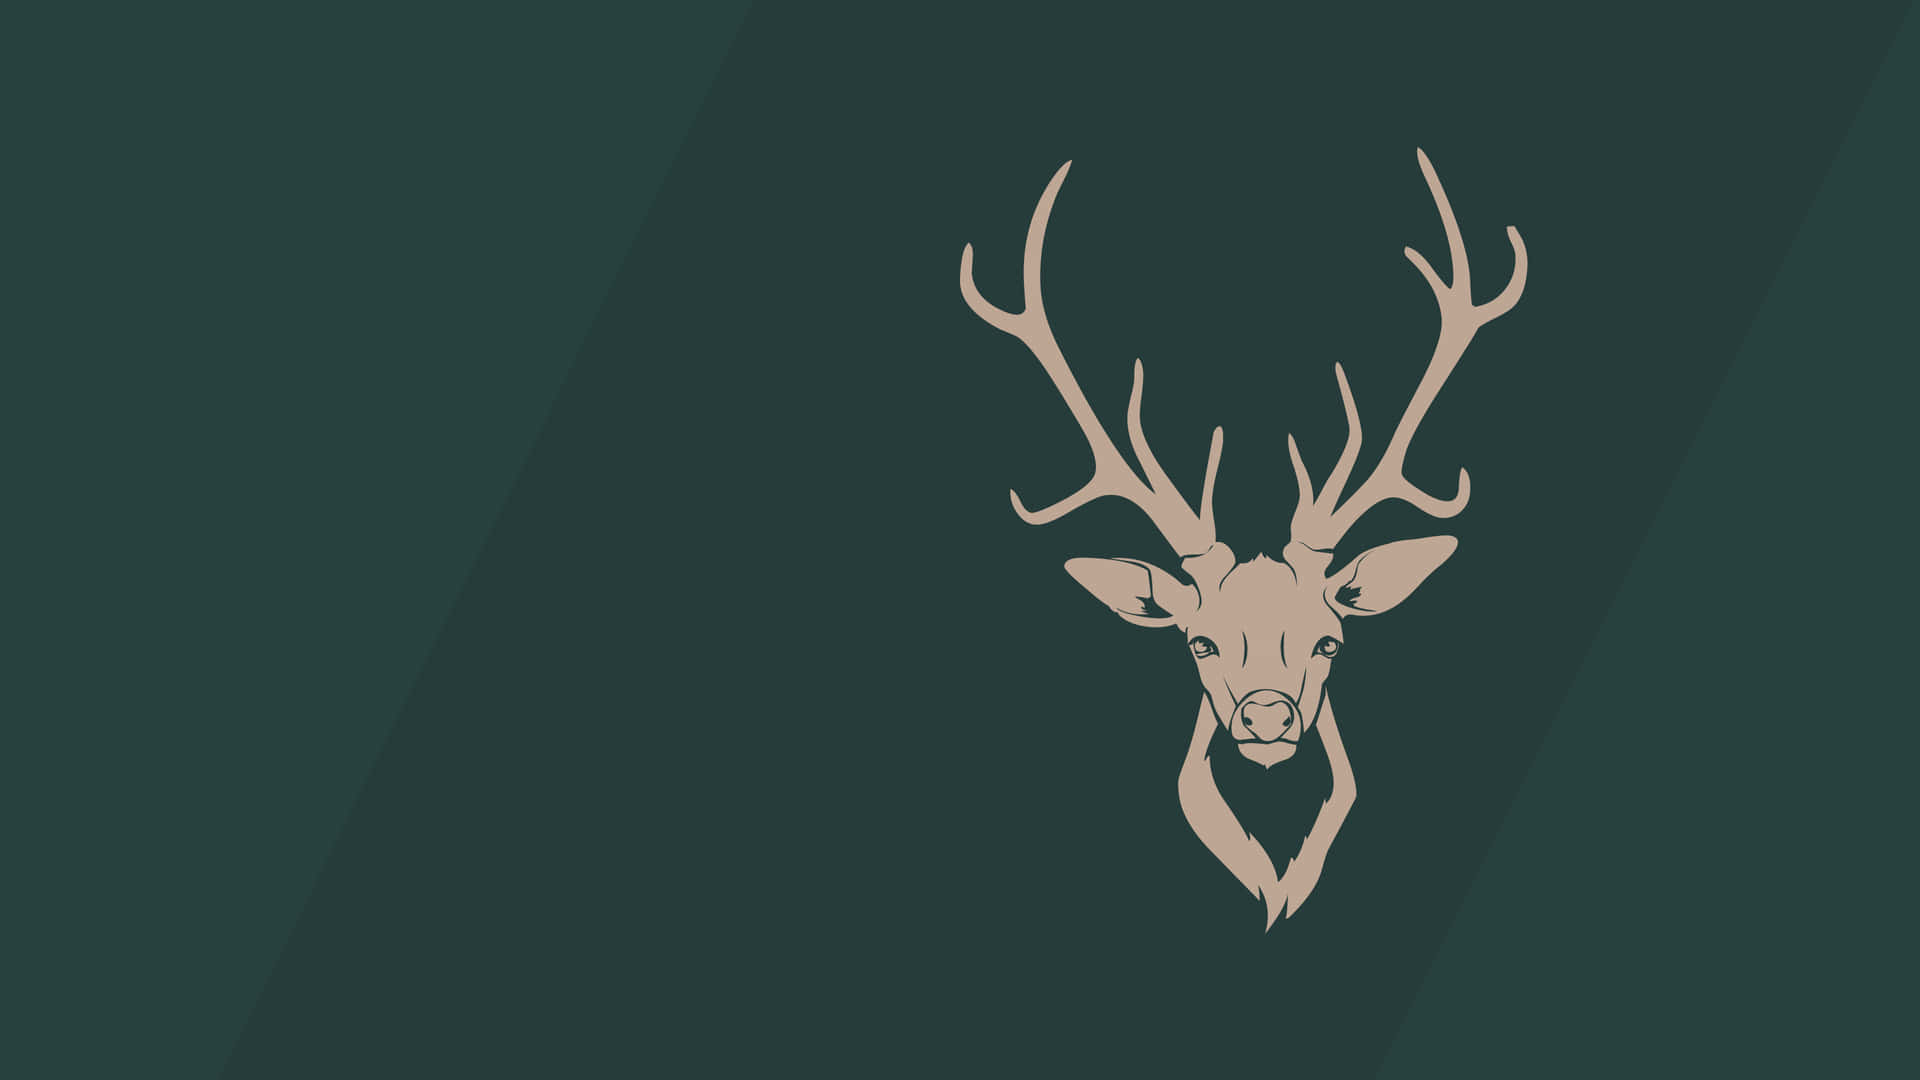 "A Majestic+Stag Surveying Its Majestic Natural Surroundings" Wallpaper